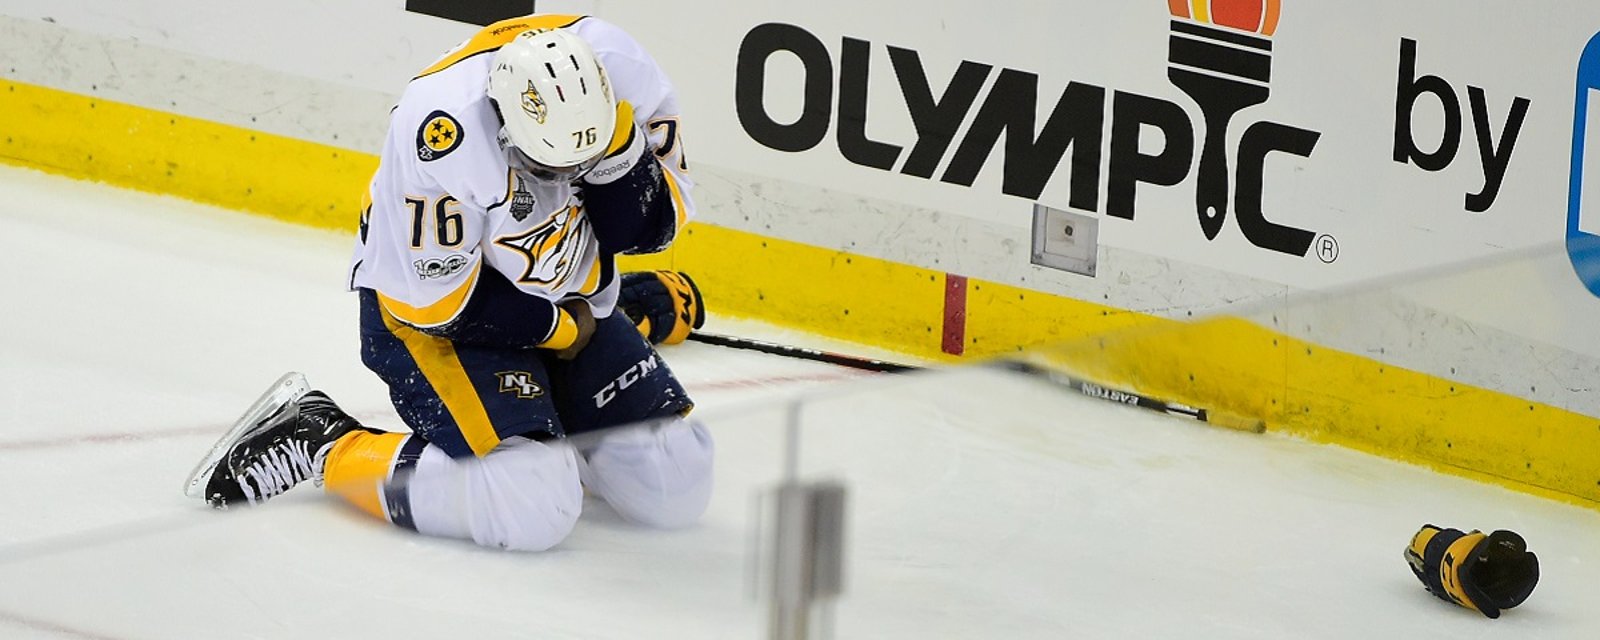 Breaking: Former NHLer claims Subban was silenced by Preds after violating team rules.